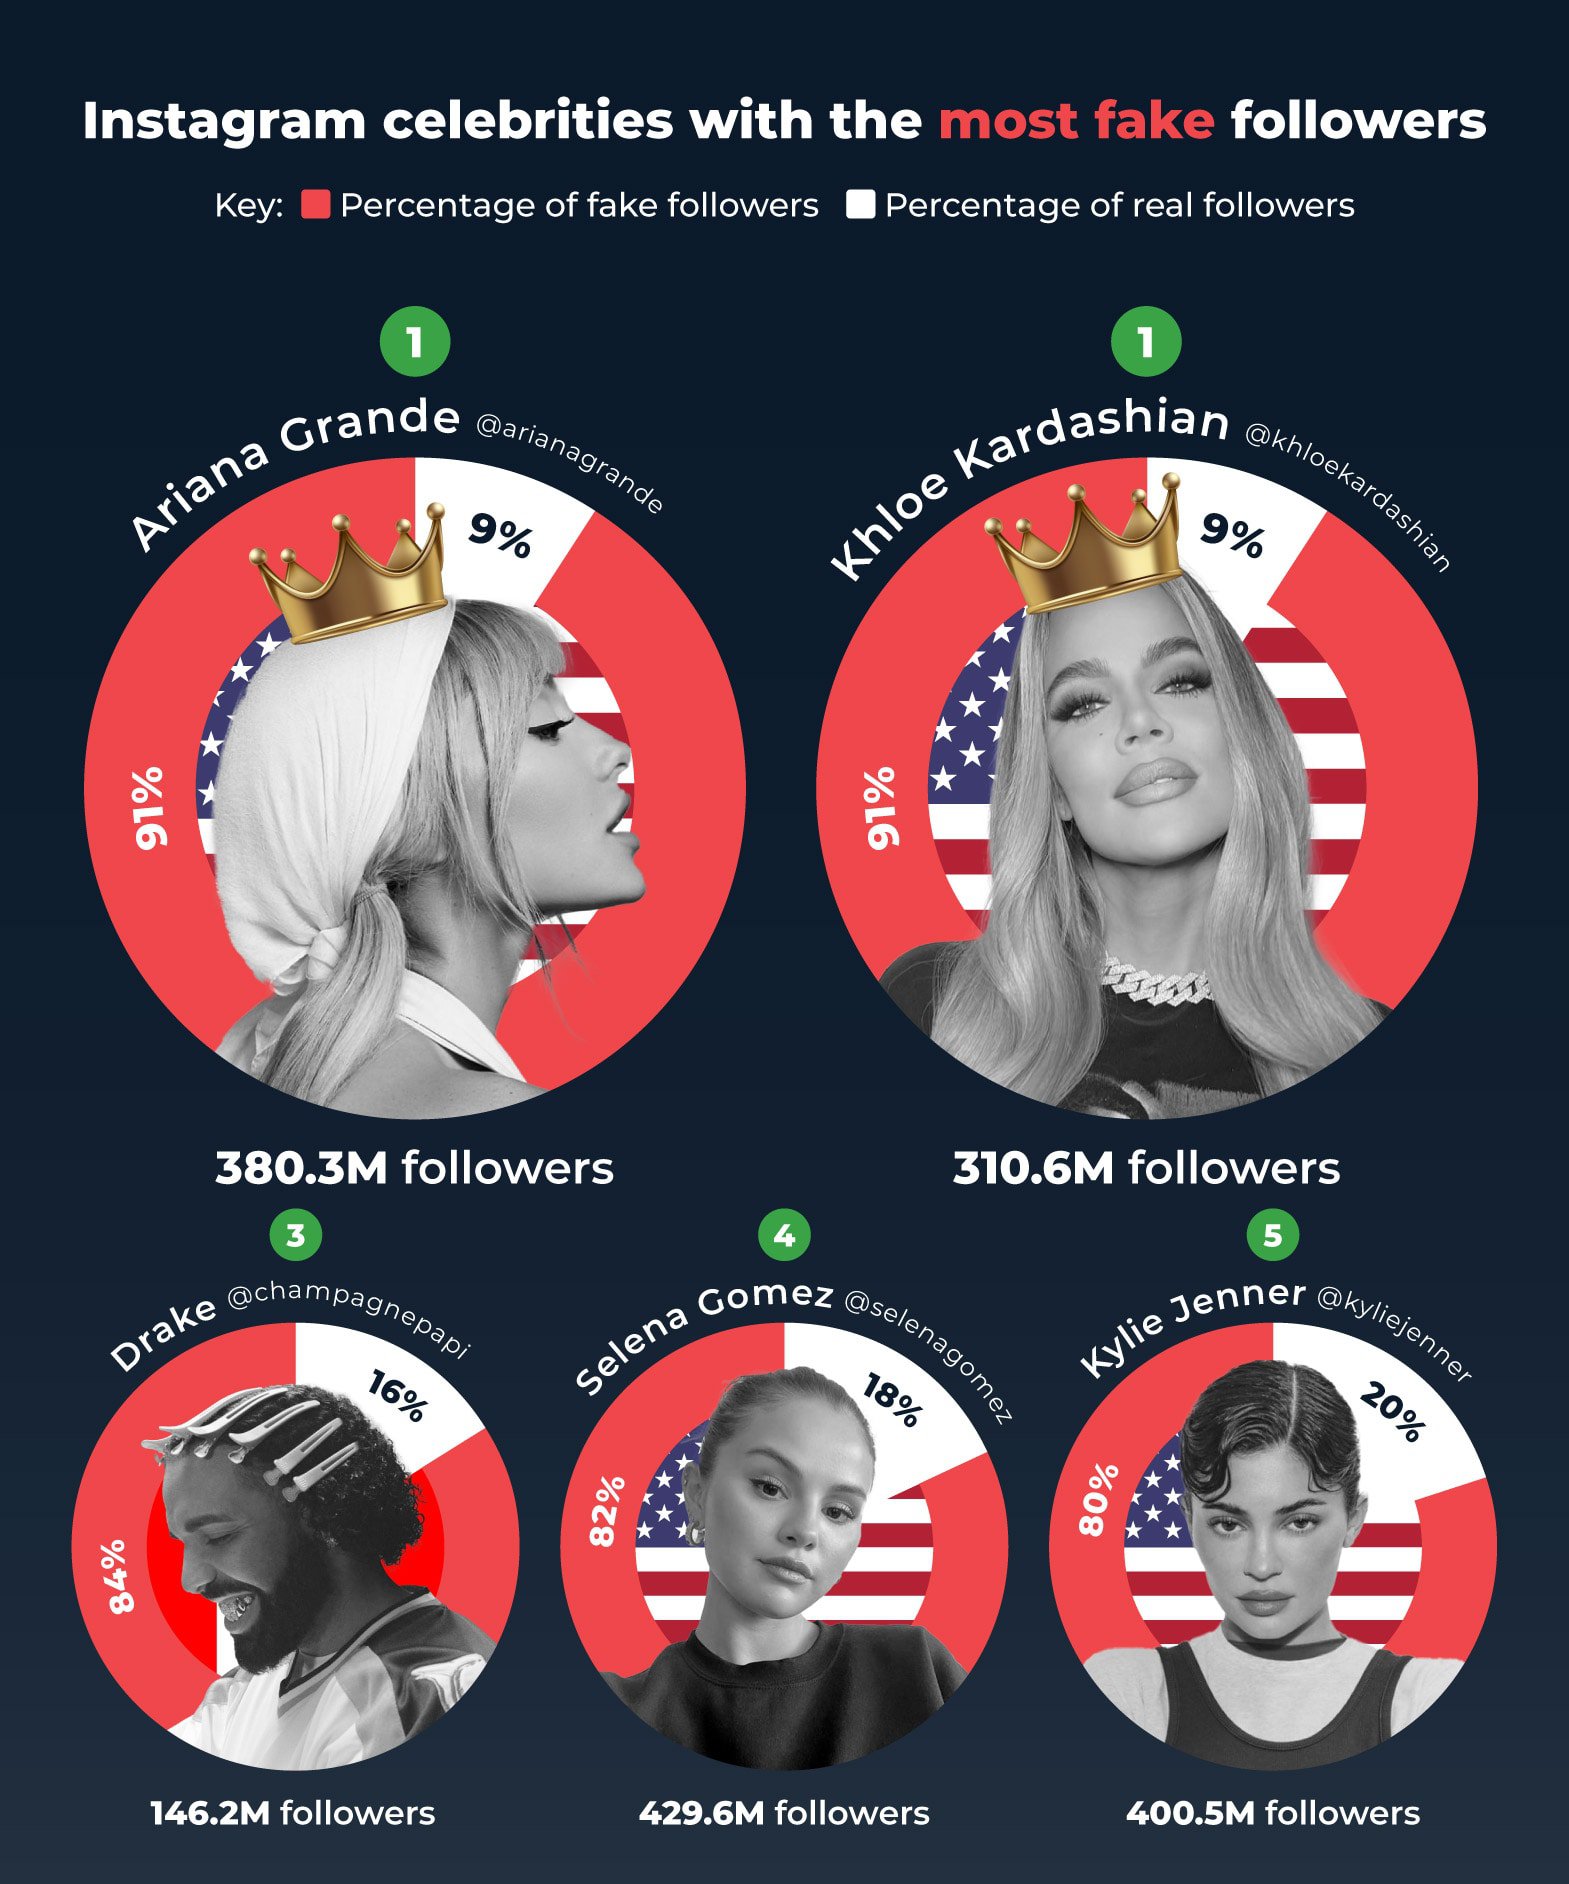 Instagram celebrities with the most fake followers